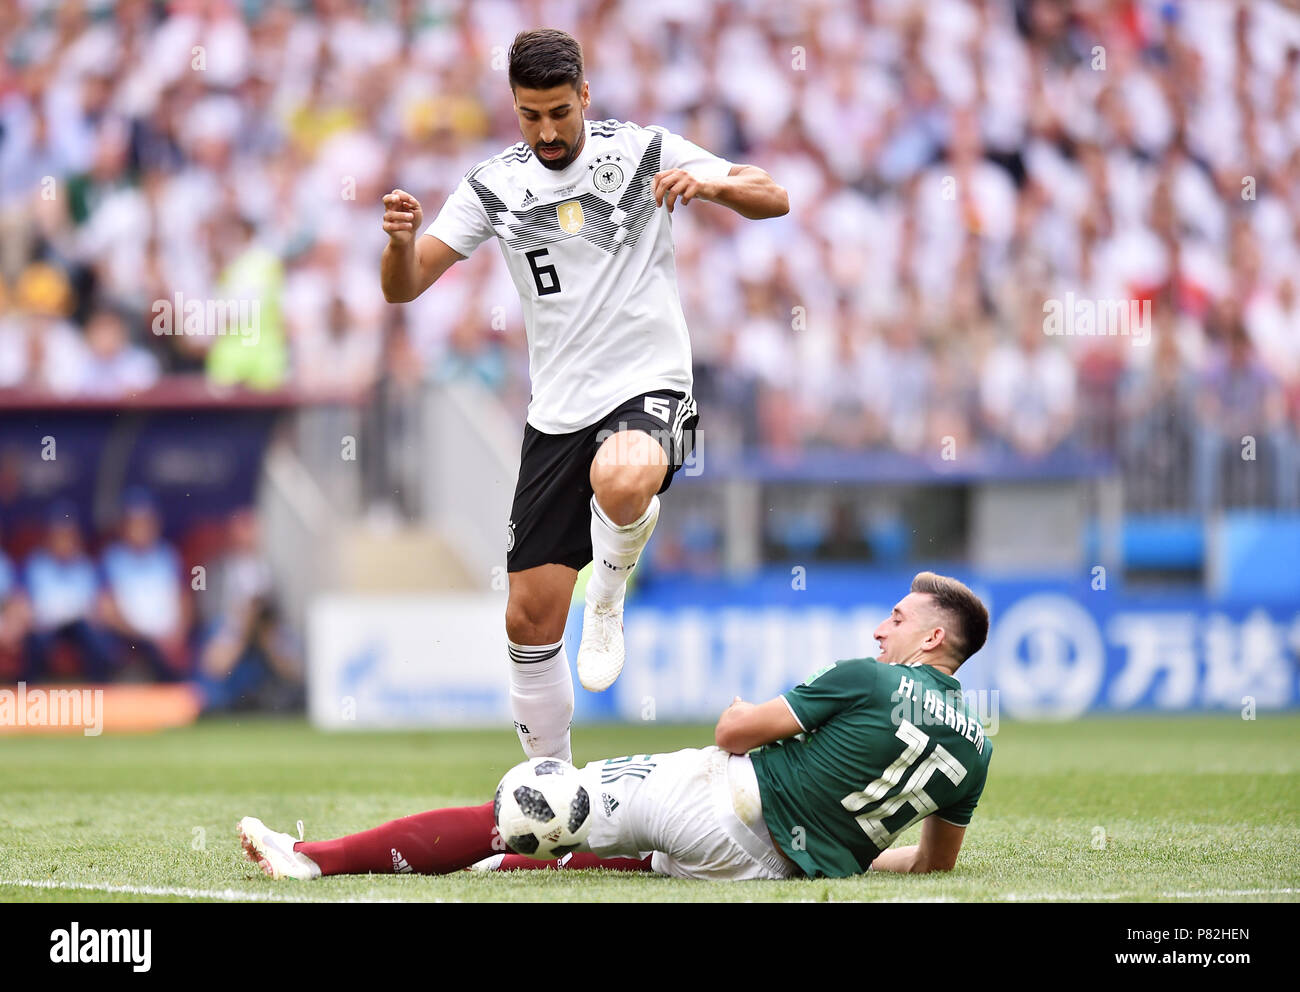 MOSCOW, RUSSIA - JUNE 17: Sami Khedira of Germany competes with Hector Herrera of Mexico during the 2018 FIFA World Cup Russia group F match between Germany and Mexico at Luzhniki Stadium on June 17, 2018 in Moscow, Russia. (Photo by Lukasz Laskowski/PressFocus/MB Media) Stock Photo